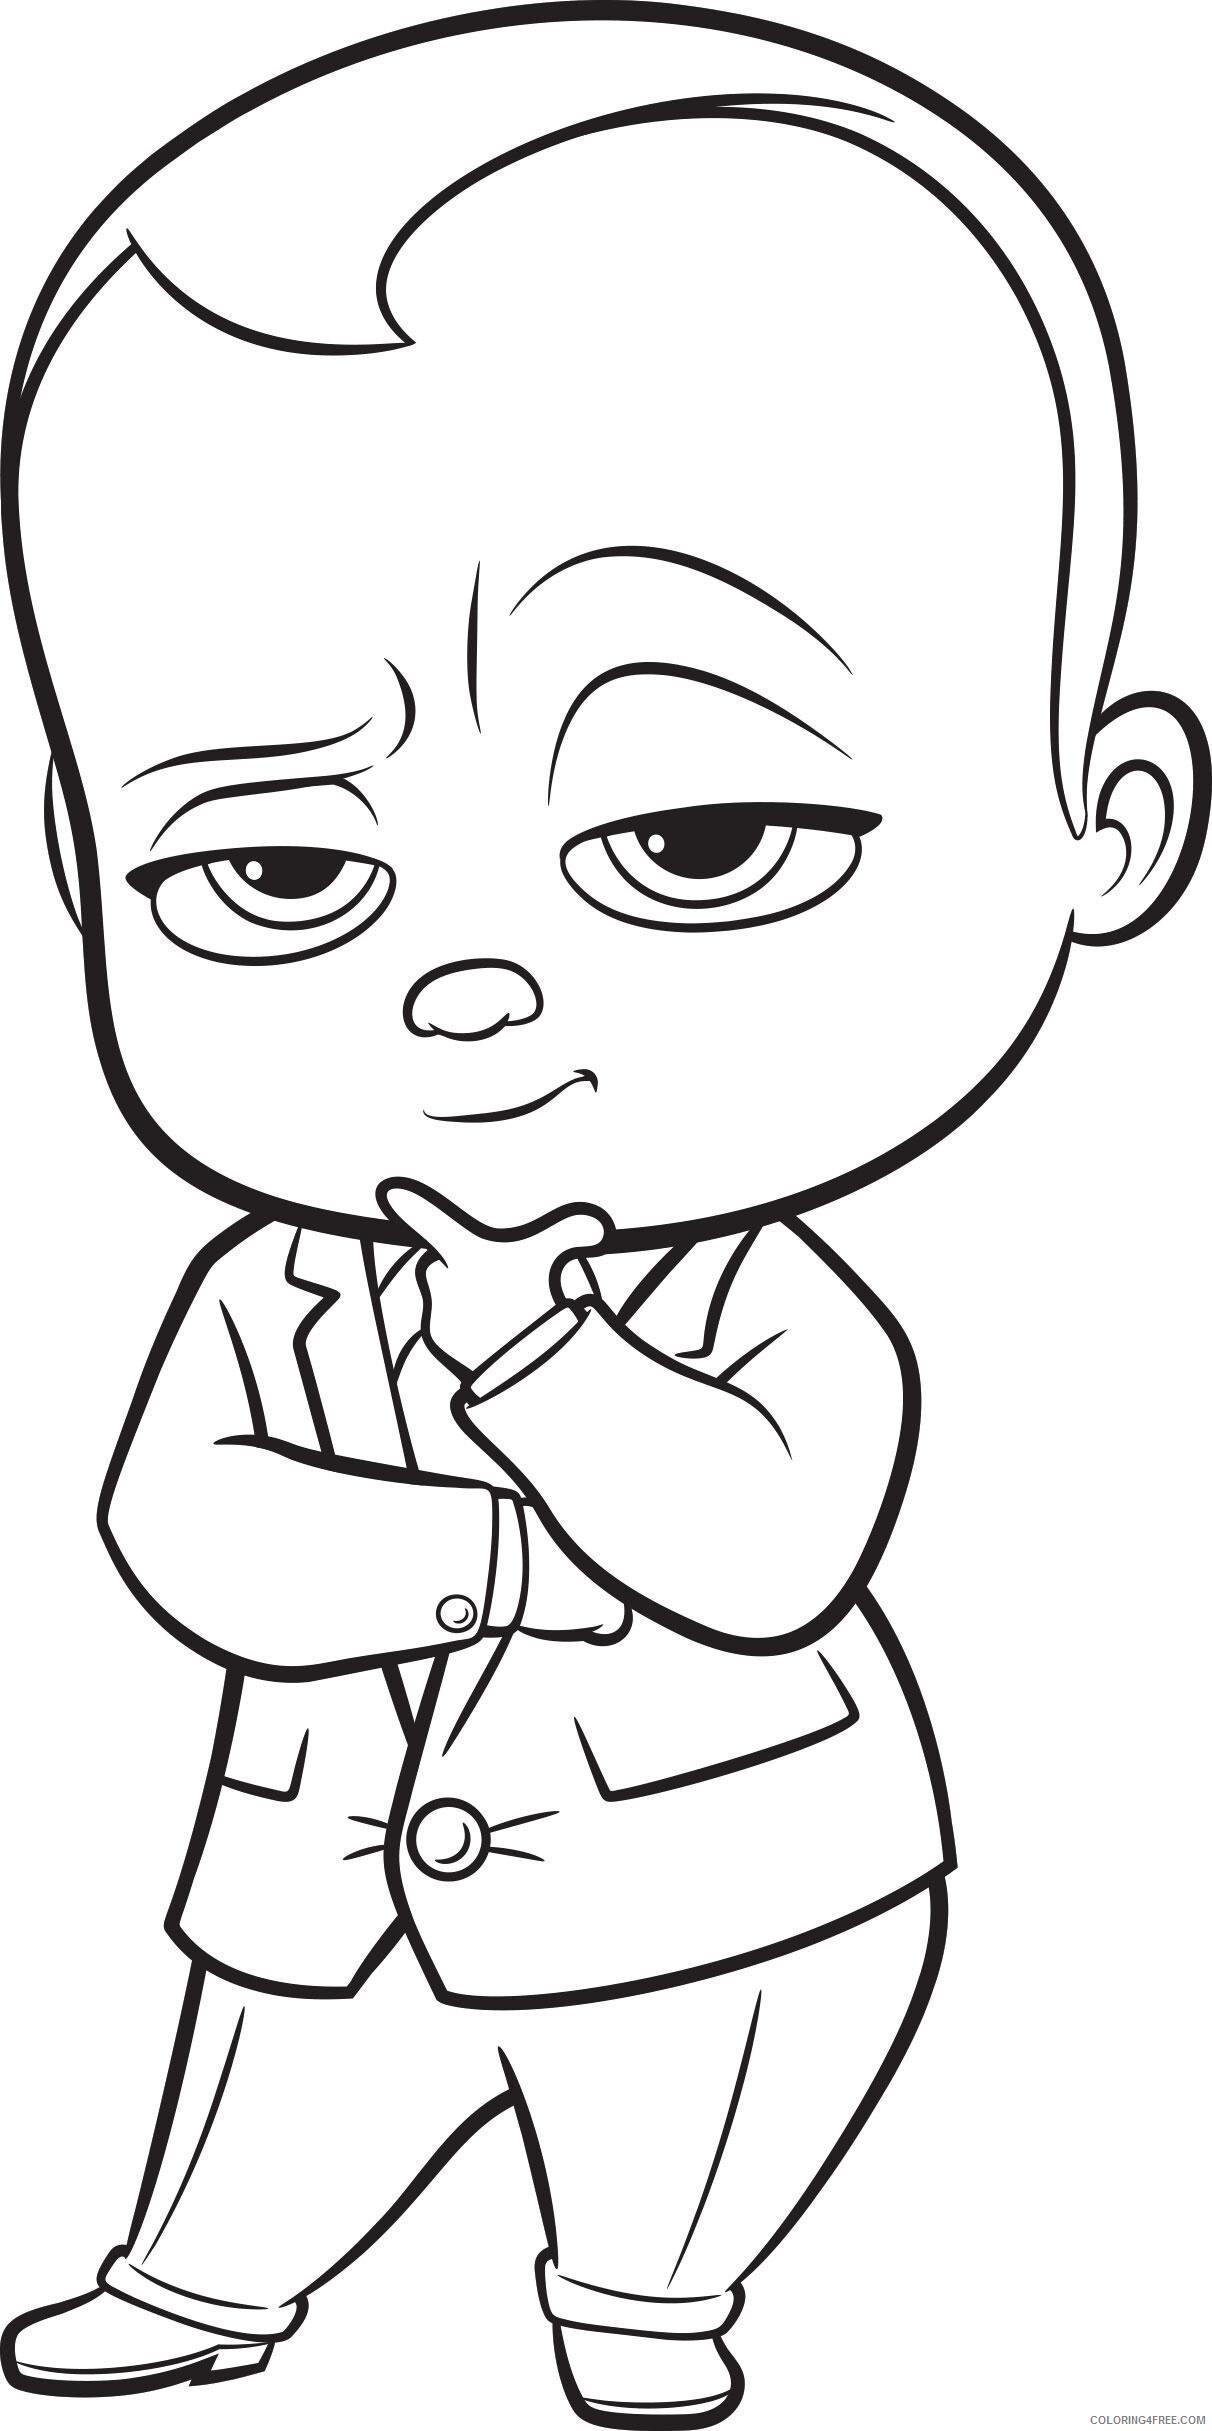 Boss Baby Coloring Pages TV Film cool boss baby a4 Printable 2020 01252 Coloring4free